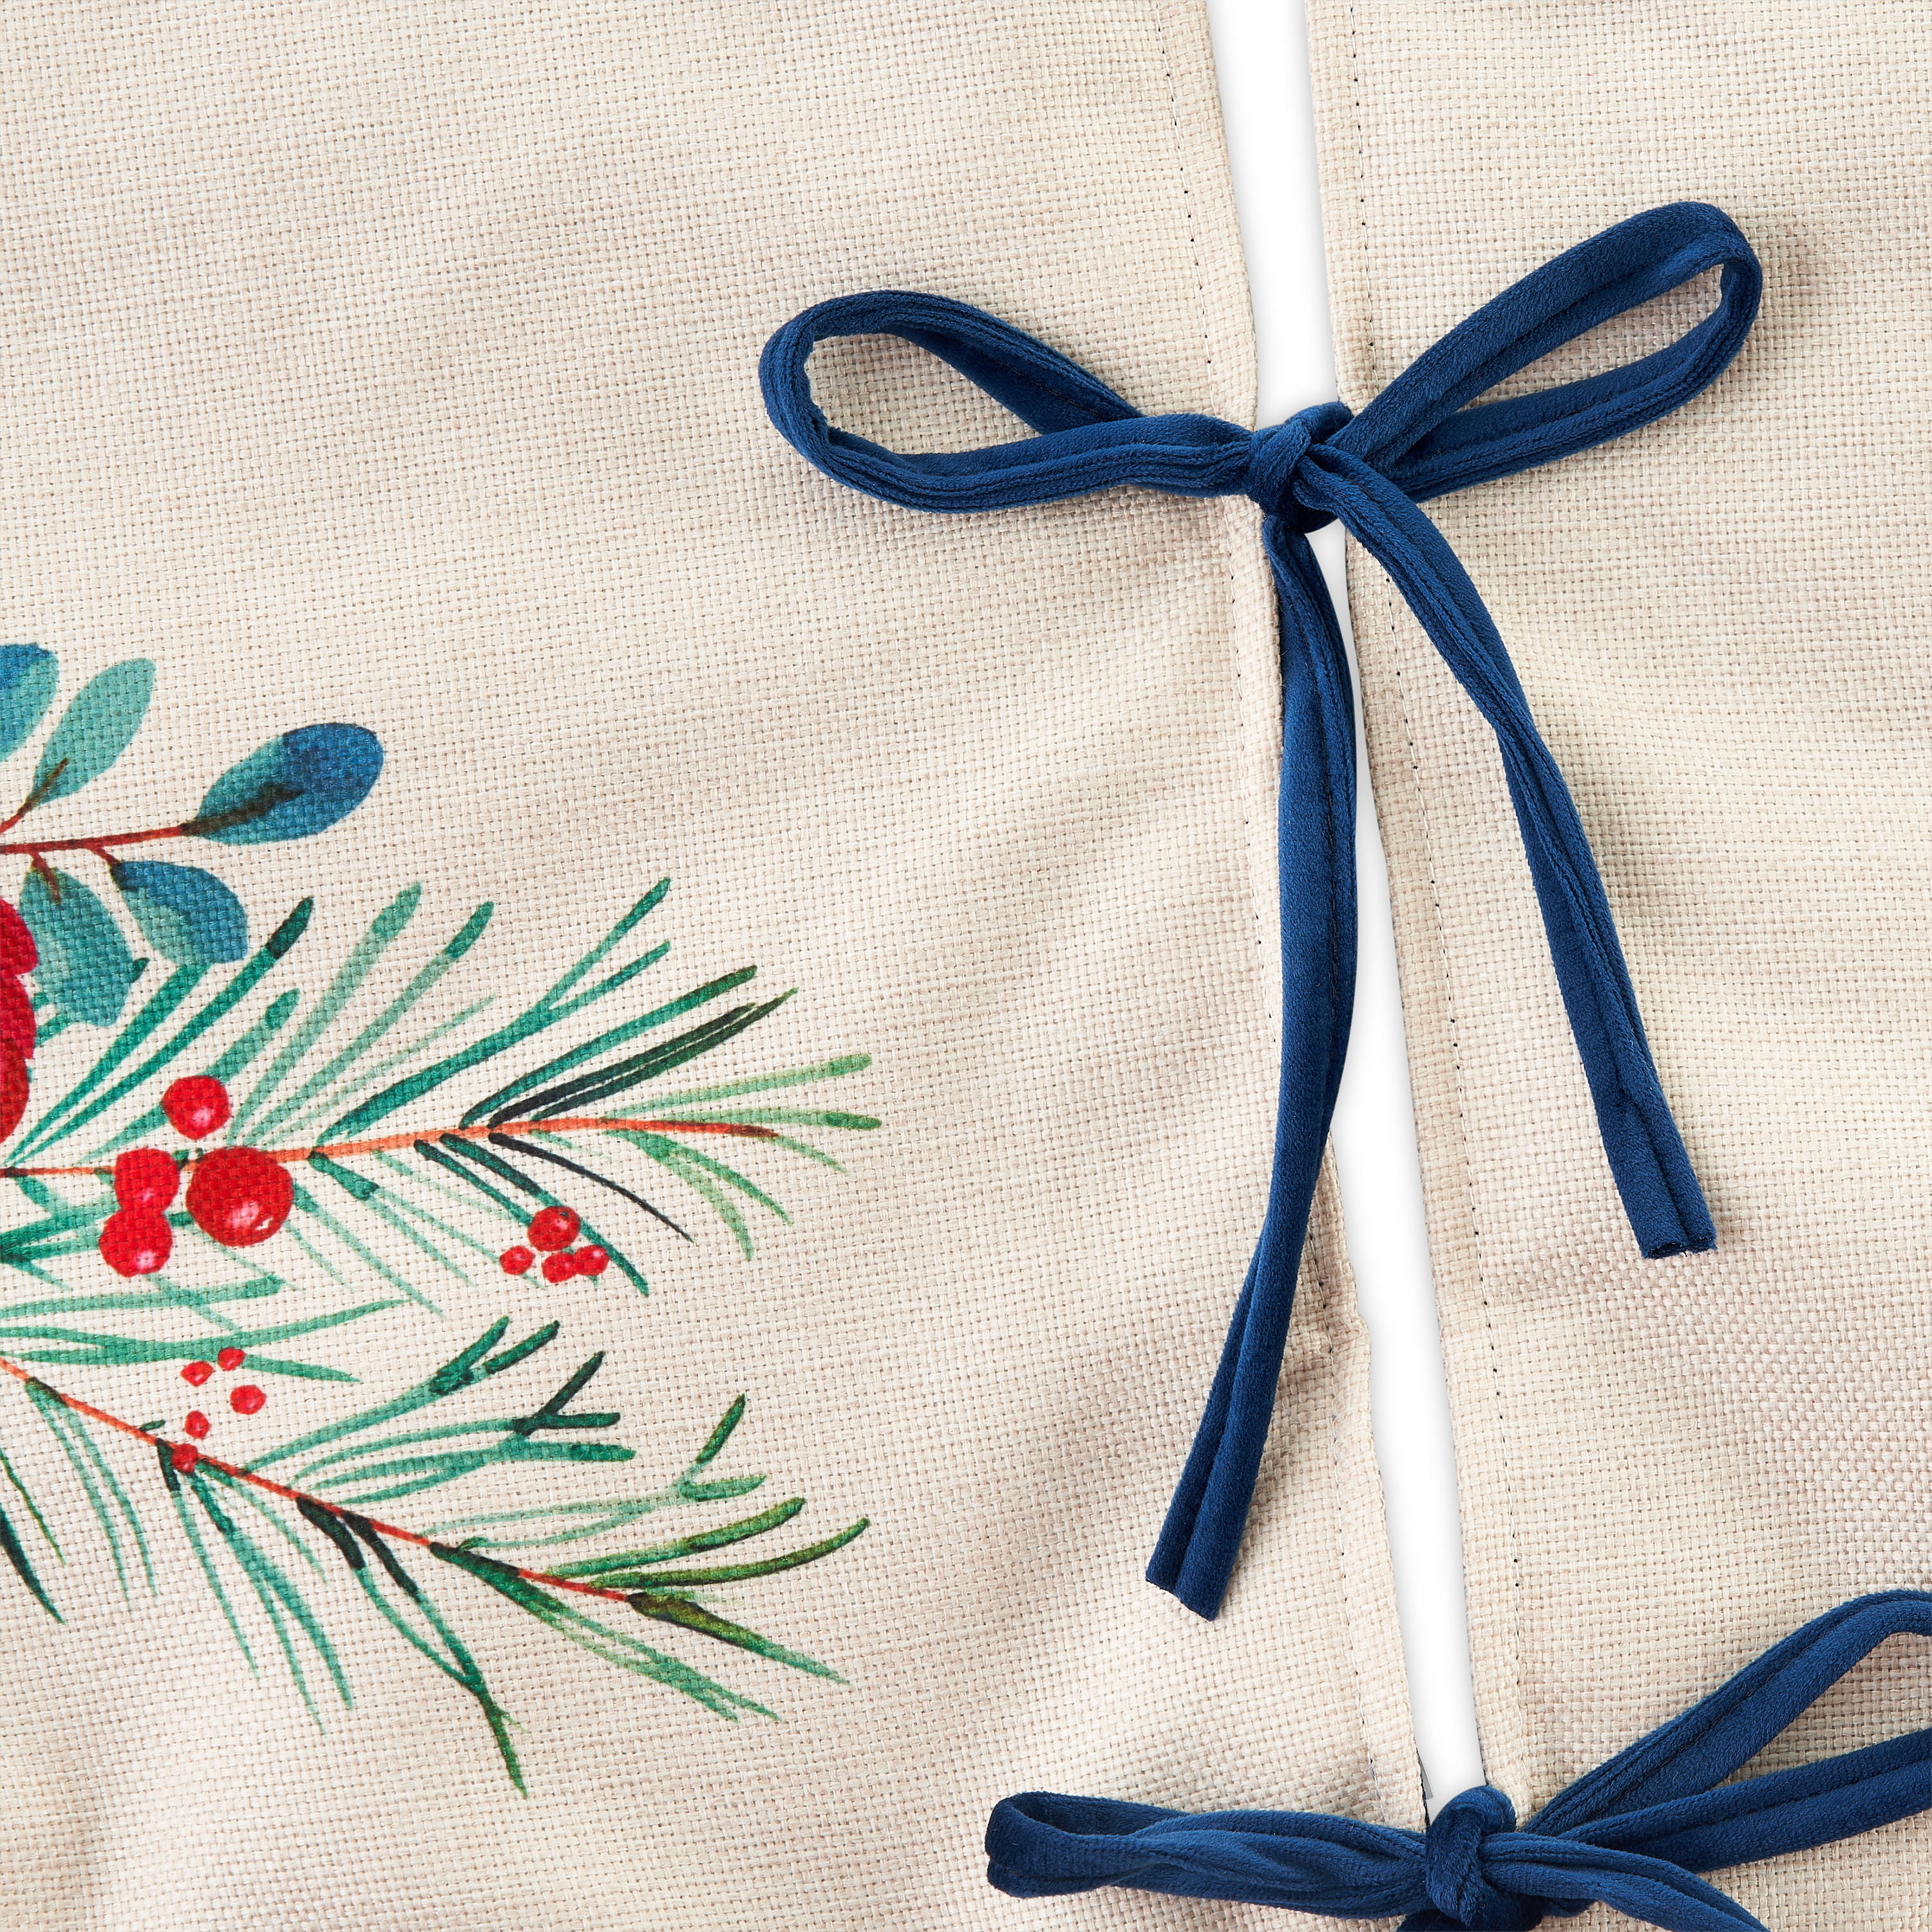 The Pioneer Woman Blue Ruffle & Red Roses Christmas Tree Skirt, 48" - image 2 of 5